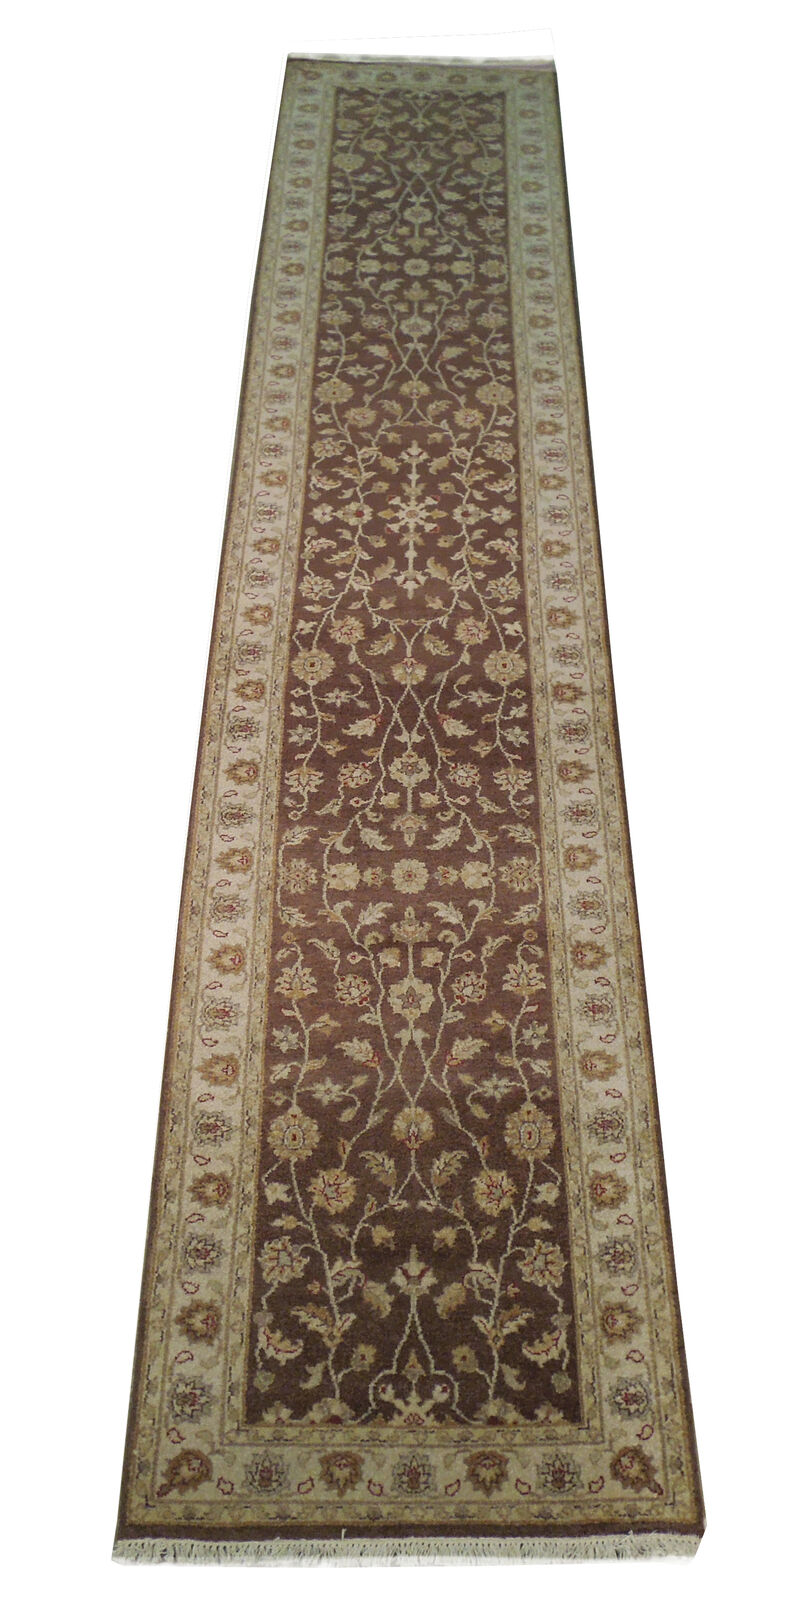 2.5 x 14 Natural Dyes Oushak Rug Brown 417 x 79 cm Knotted Kitchen Runner Rugs